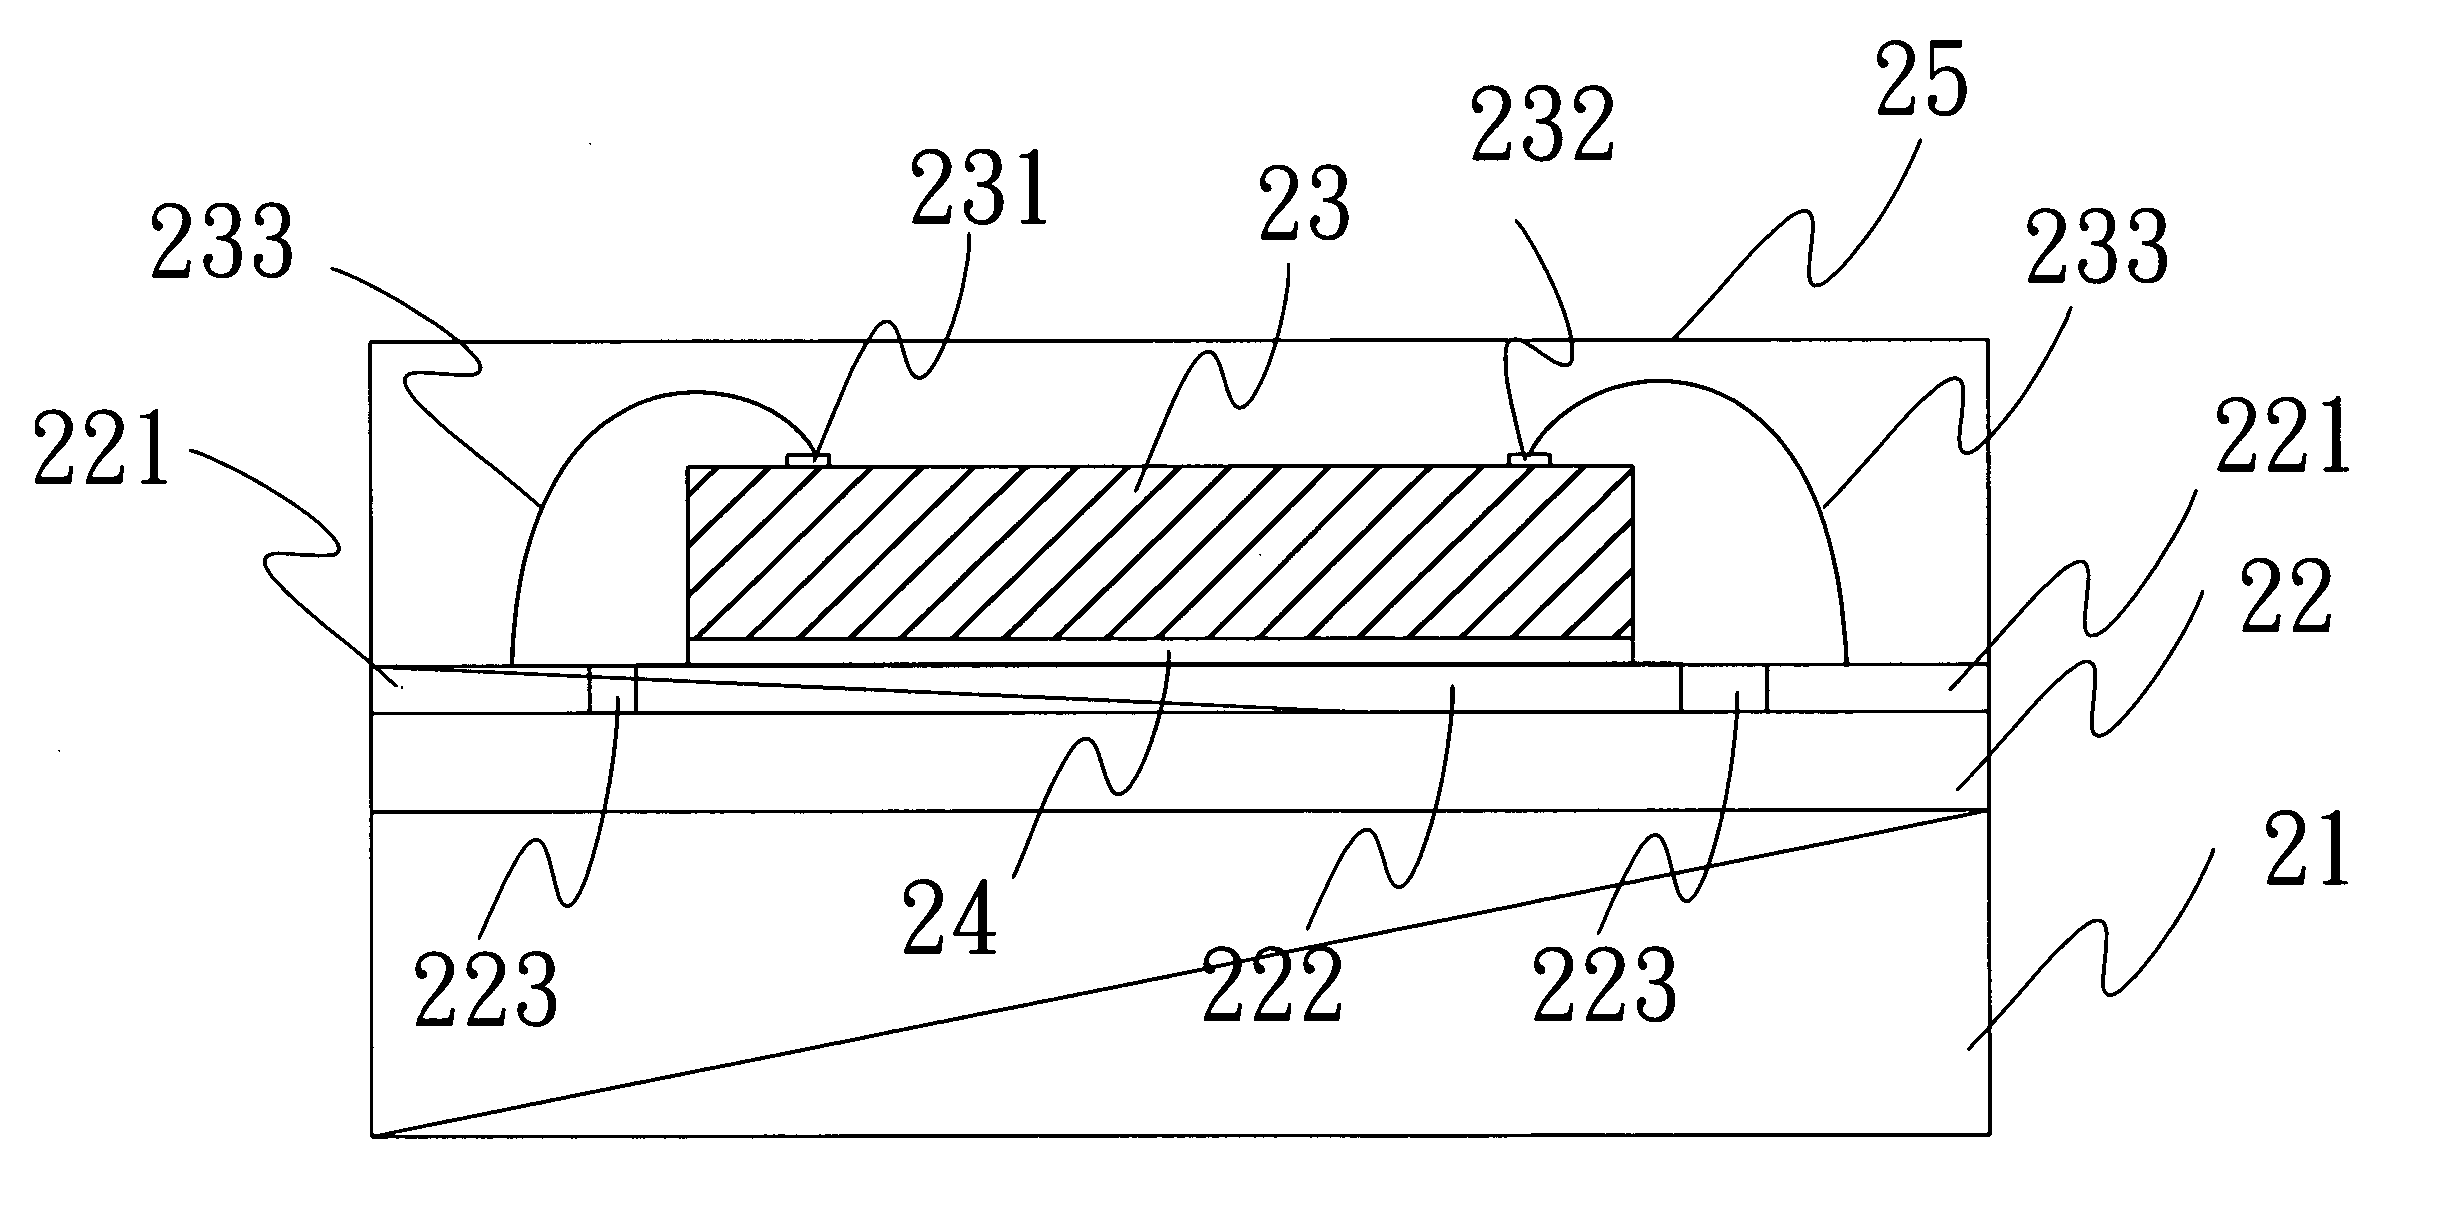 Solar cell device structure